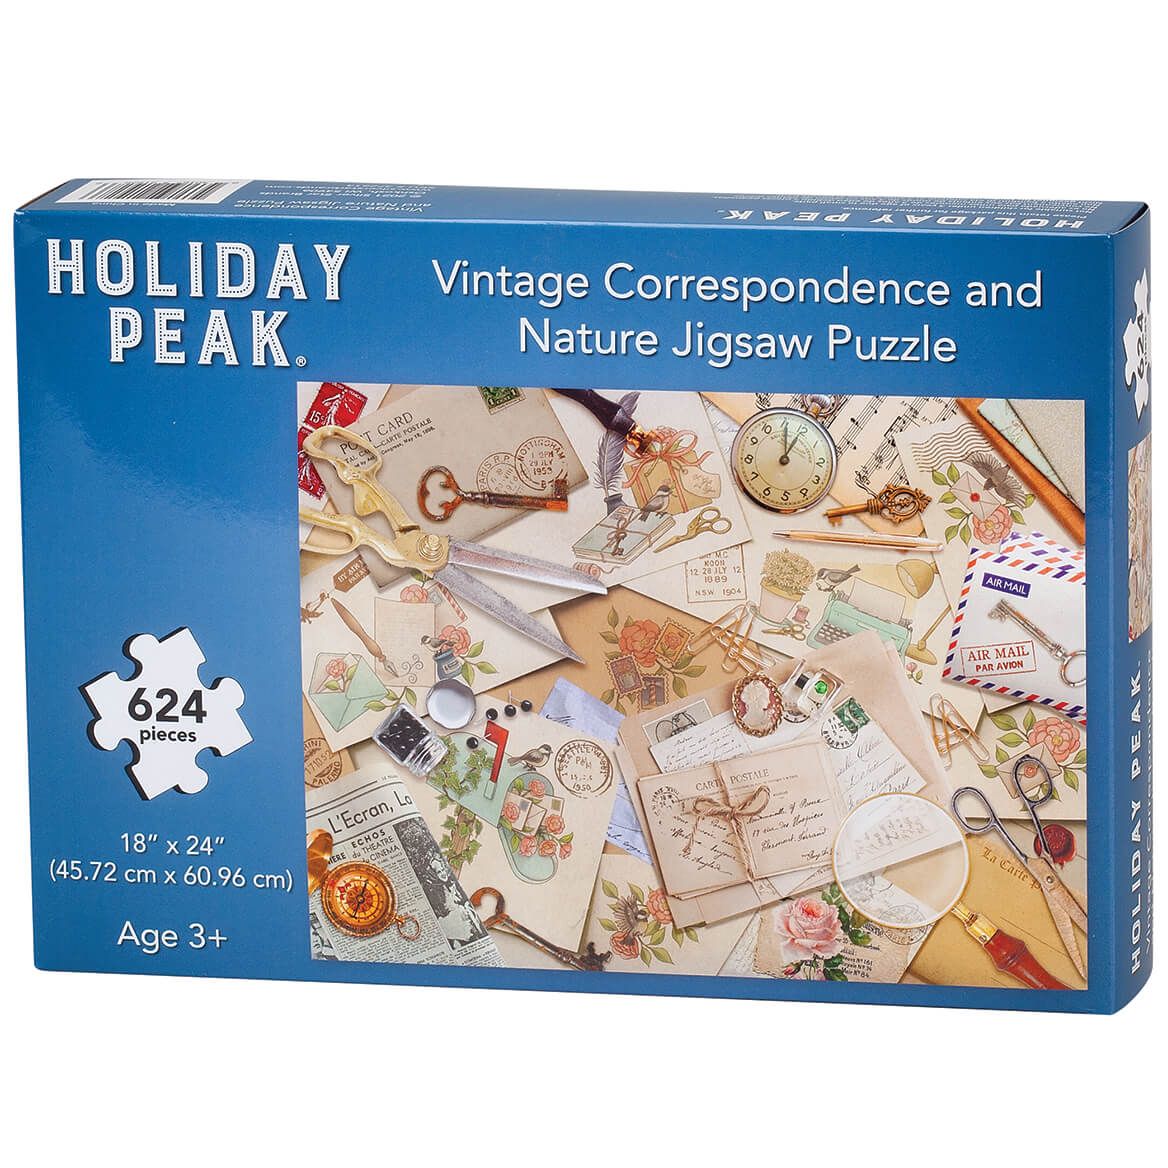 Vintage Correspondence and Nature Jigsaw Puzzle by Holiday Peak™, 624 pieces + '-' + 372614